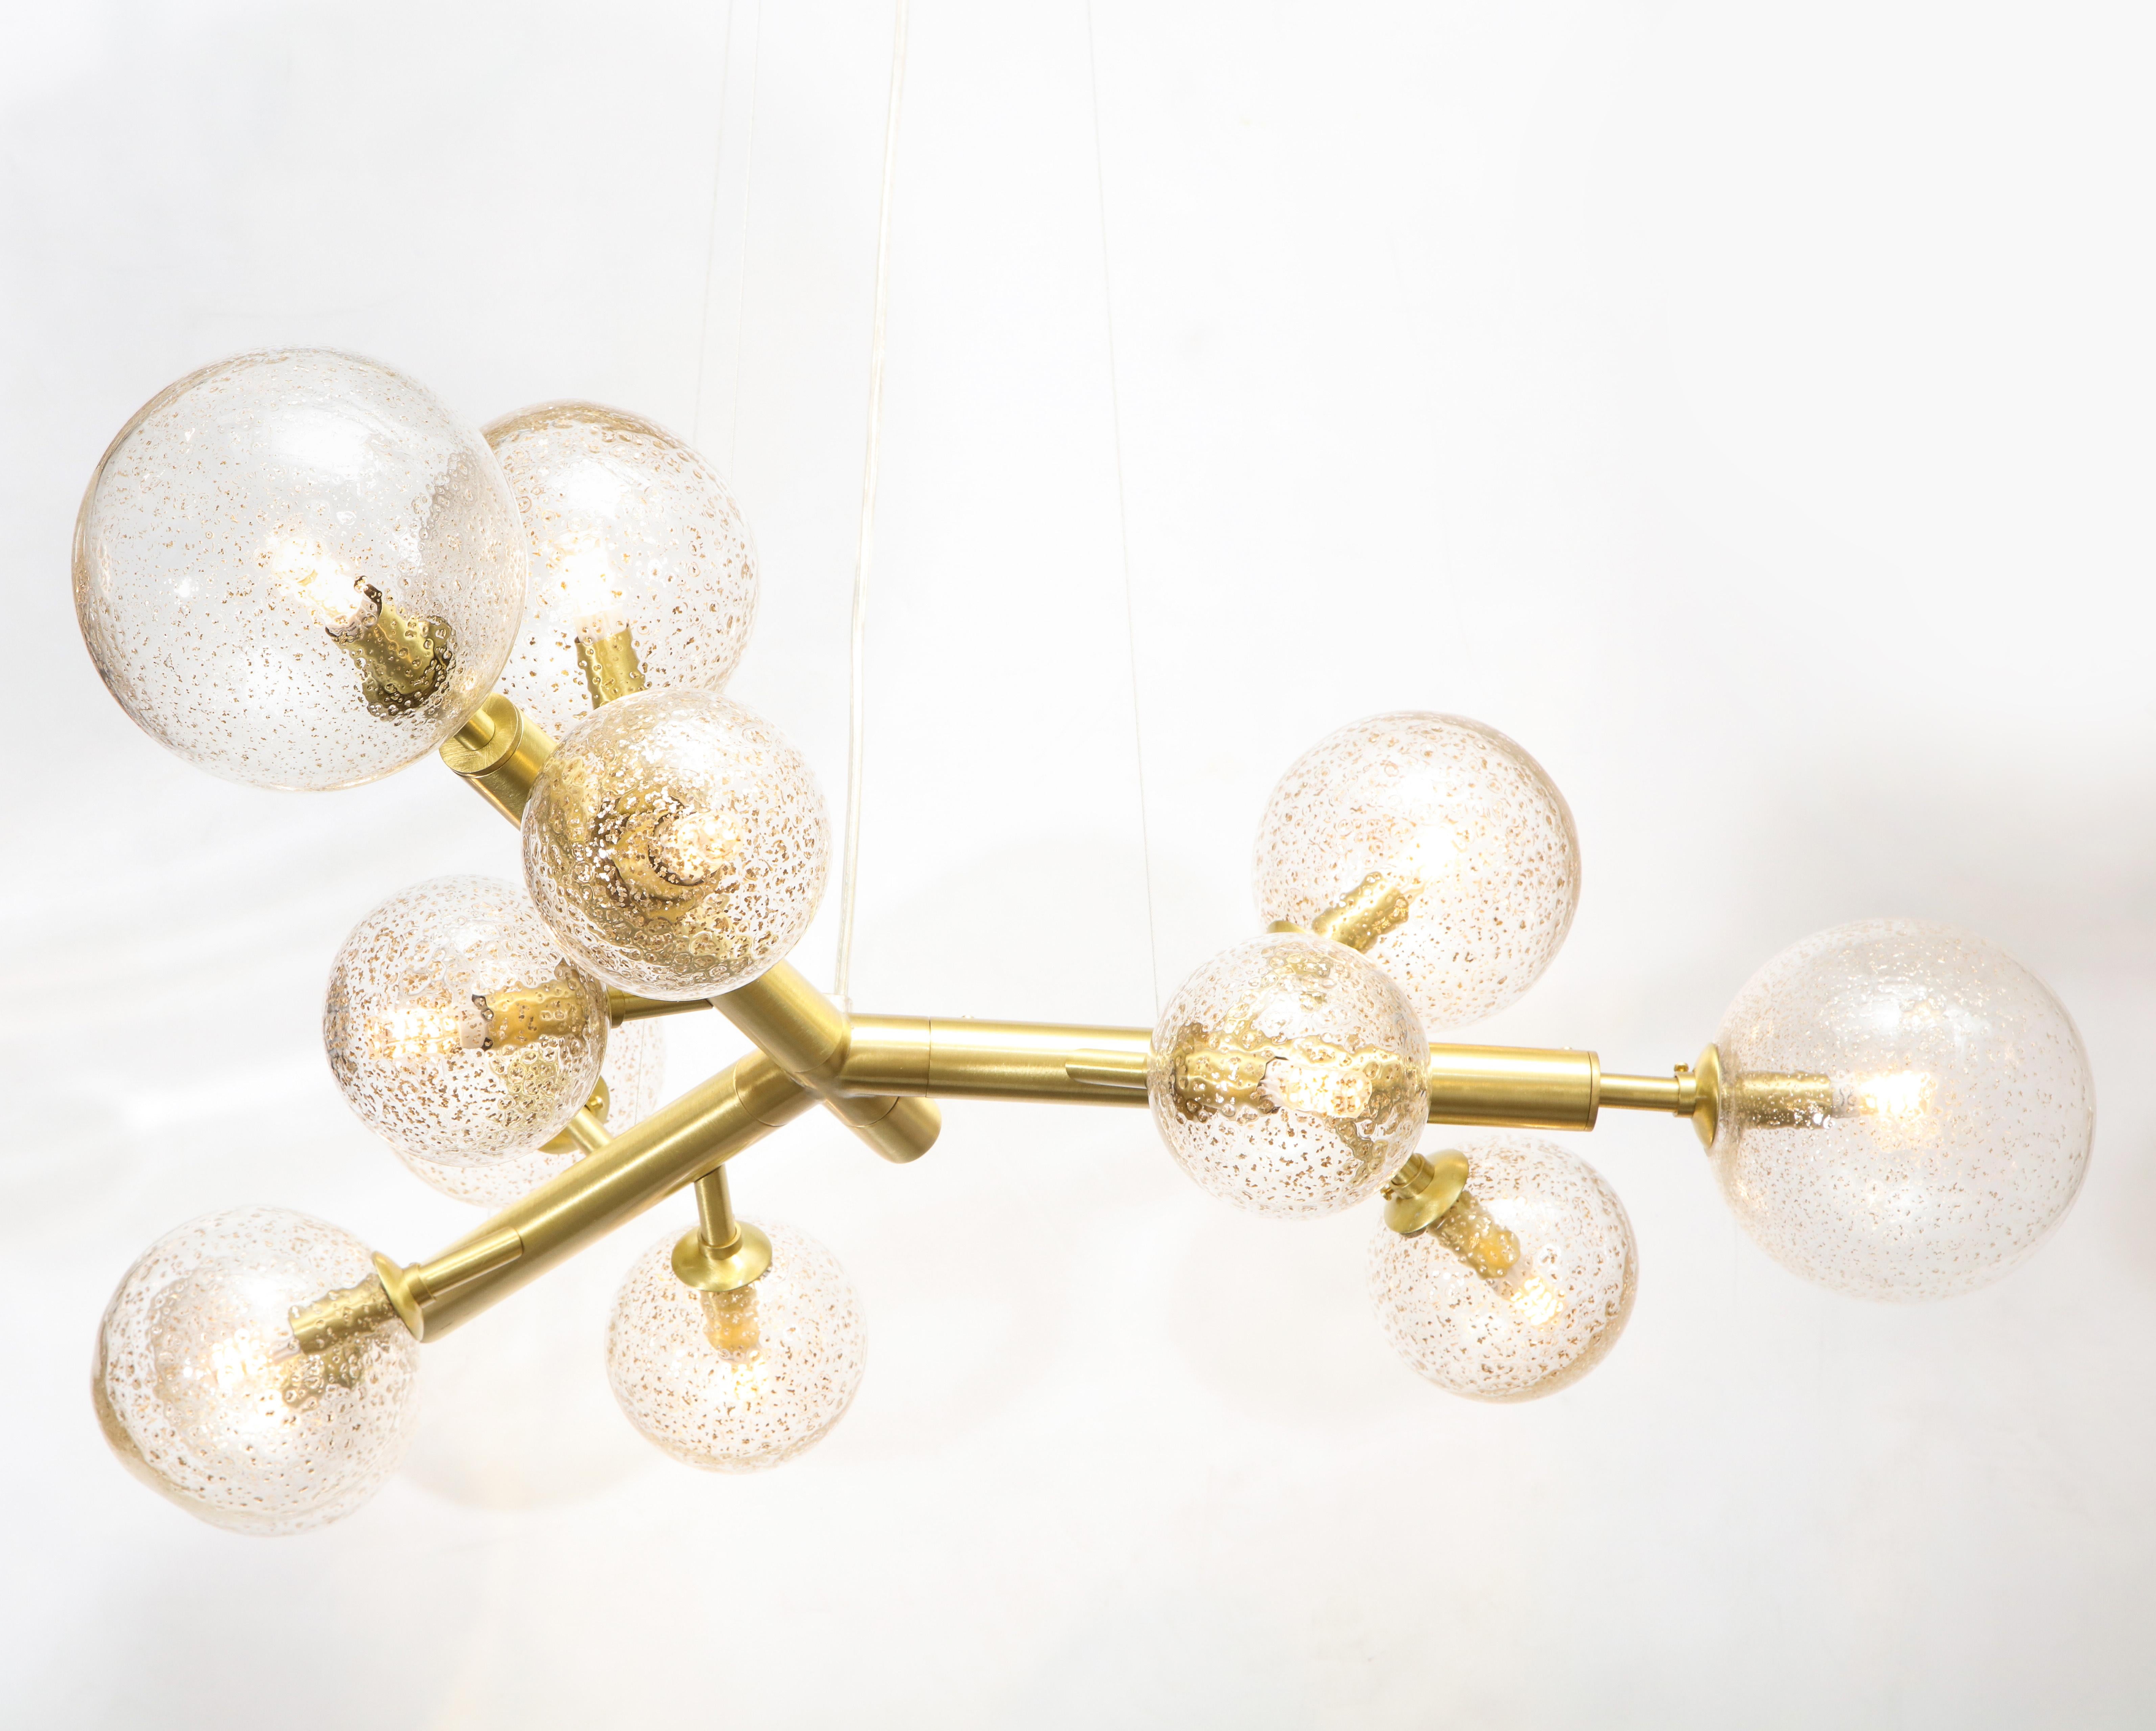 A clear and bronze flecked Murano and brass 12-light globe chandelier by Italian glass maker, Alberto Donà featuring 3 arms each with 4 different hand blown spheres of 3 varying diameters, suspended by clear, adjustable wires that extend to a 6 foot